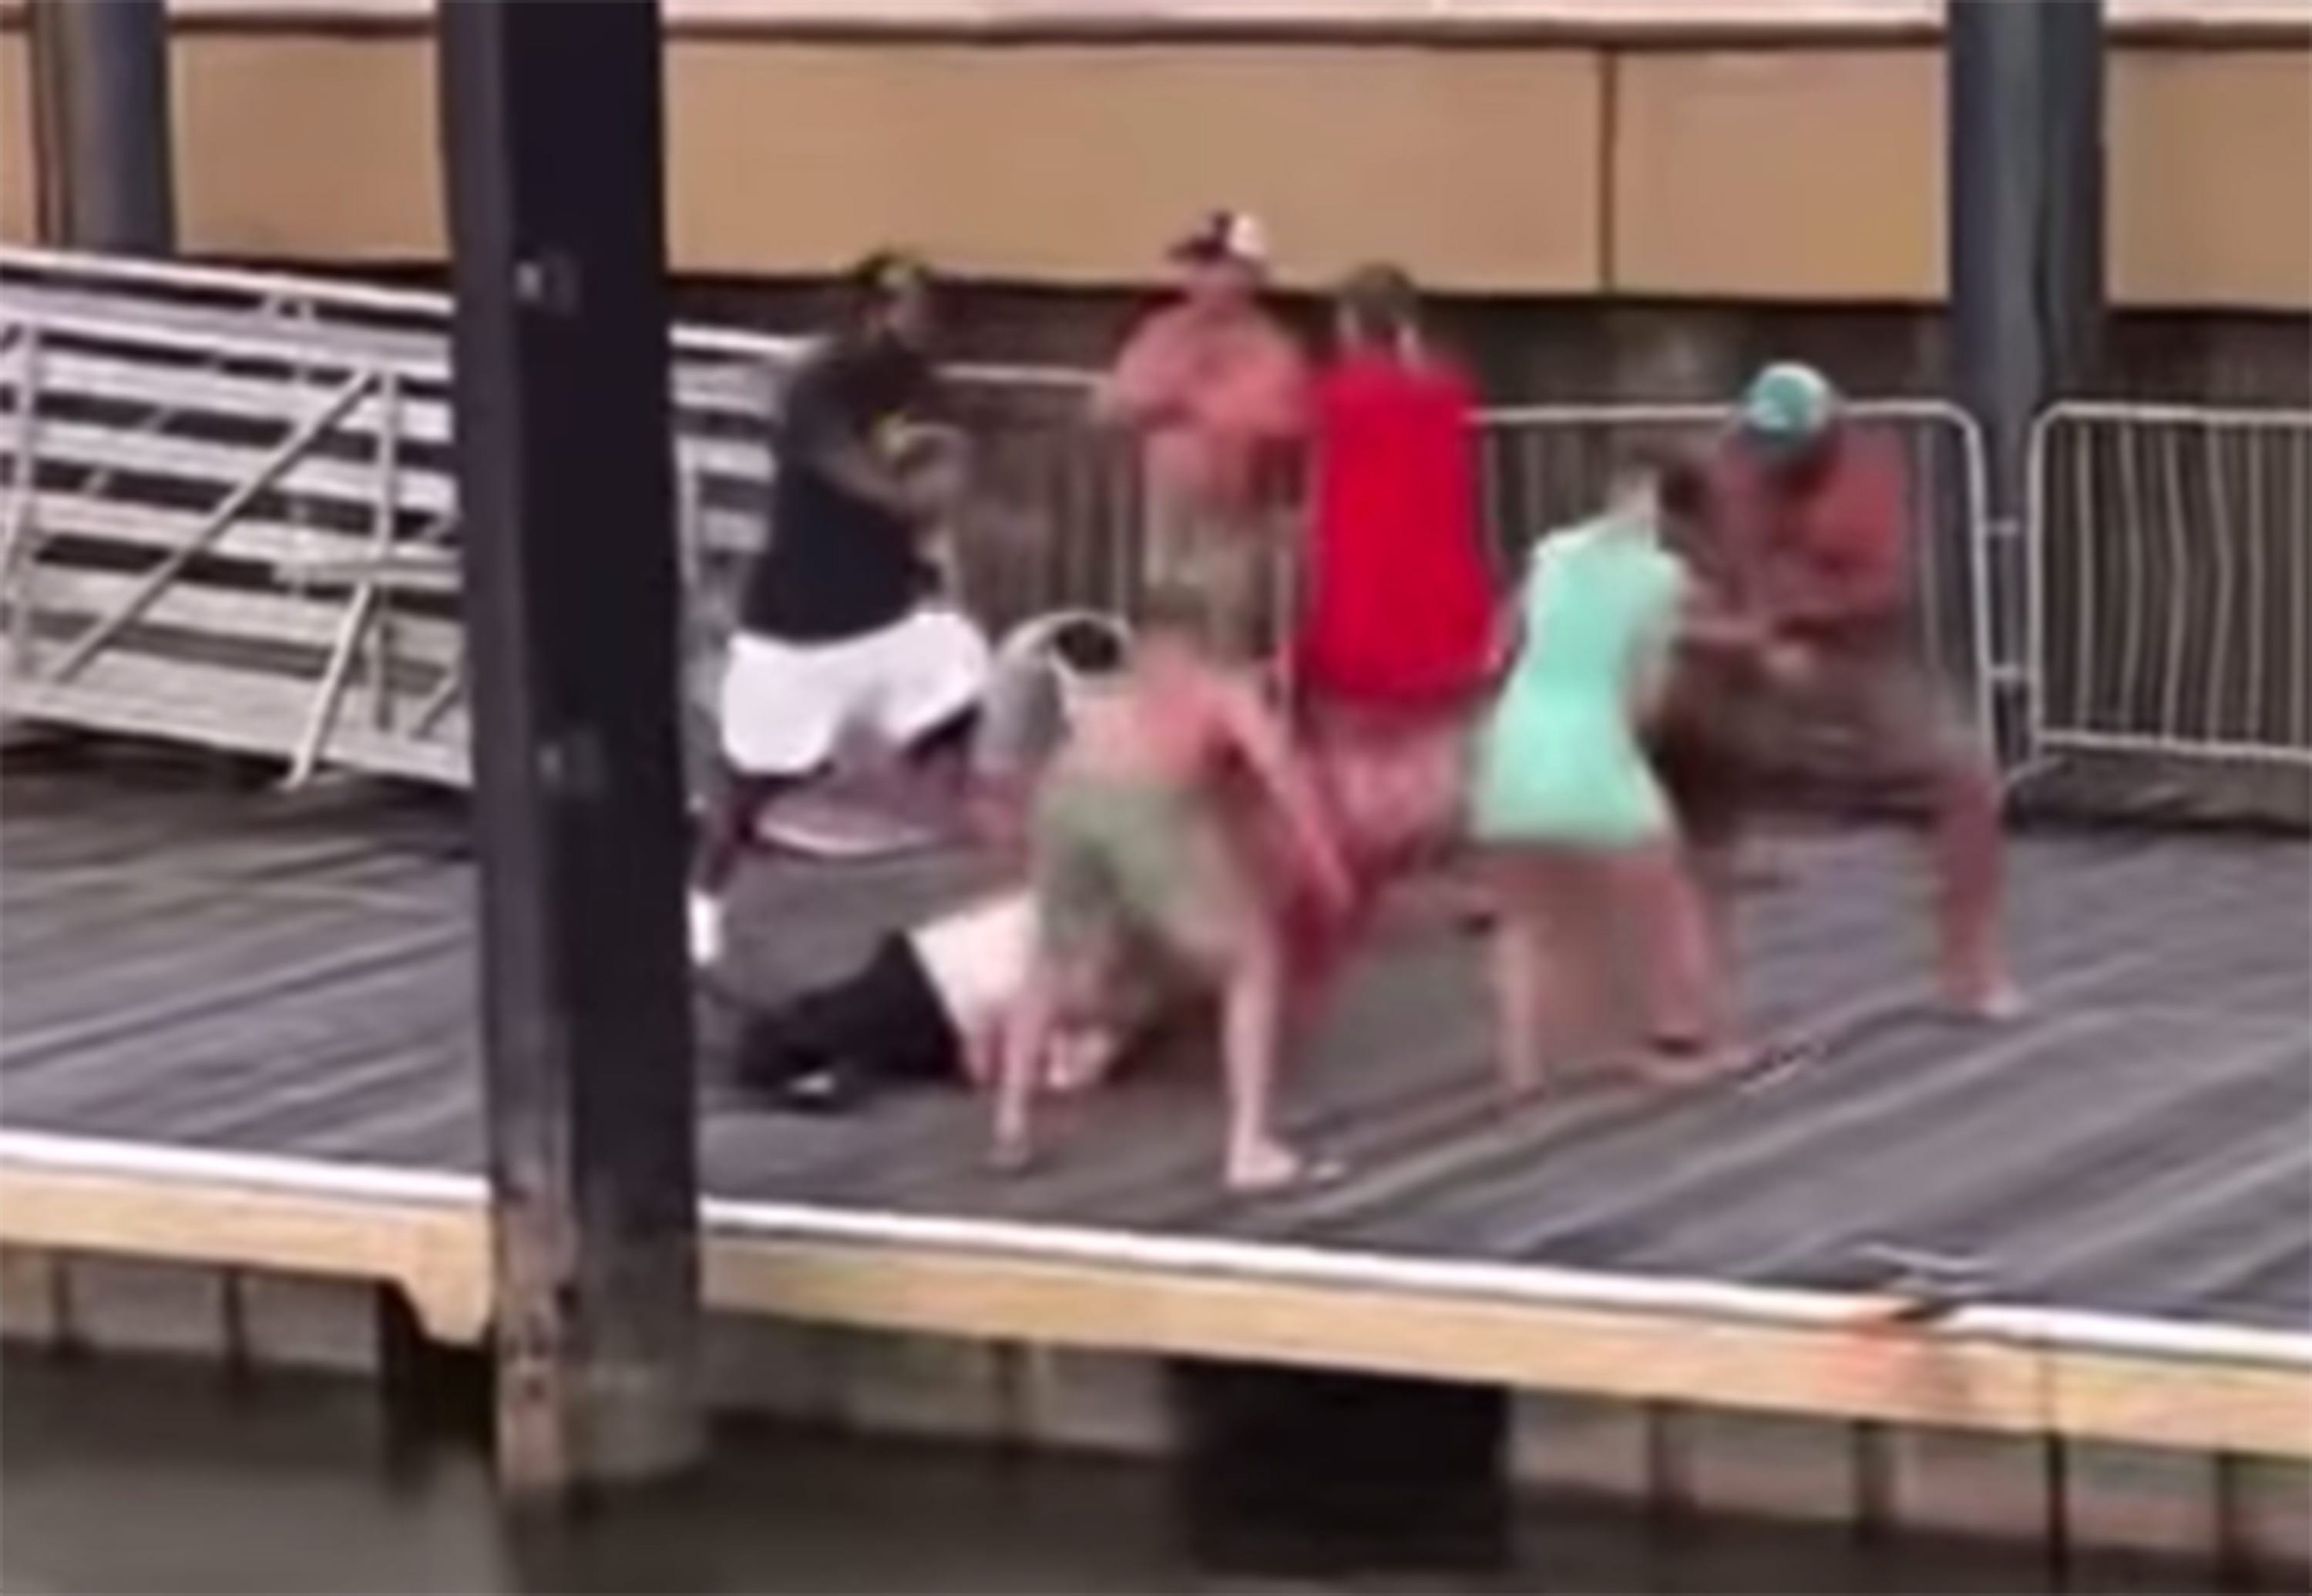 Two Men In Alabama Riverfront Brawl Plead Guilty To Harassment Assault Charges Dropped